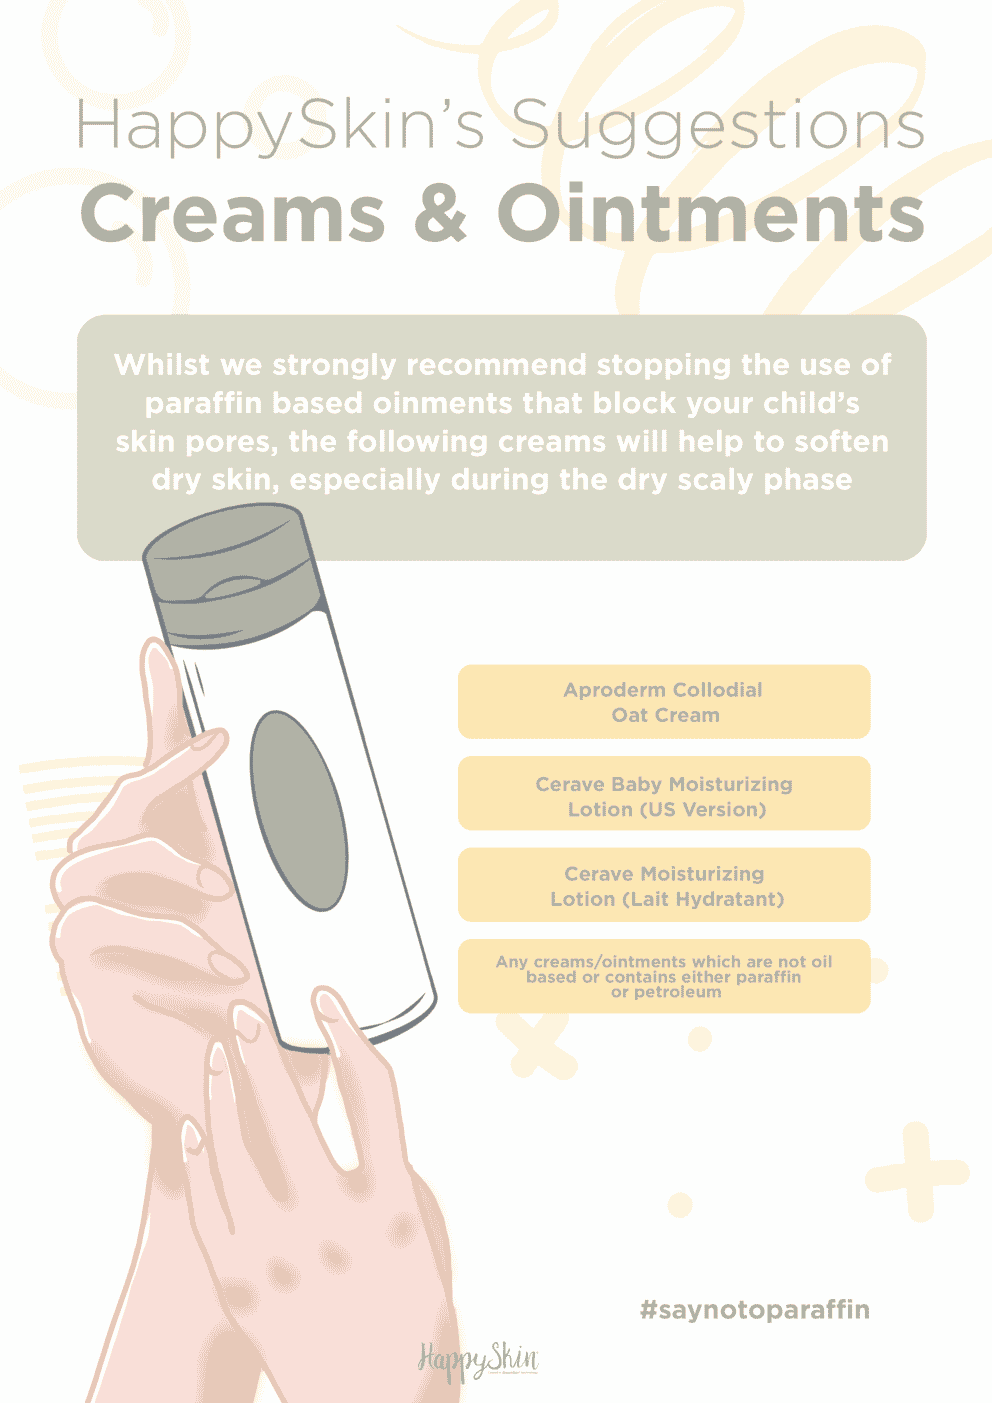 treating eczema in babies: baths, creams, ointments, clothing